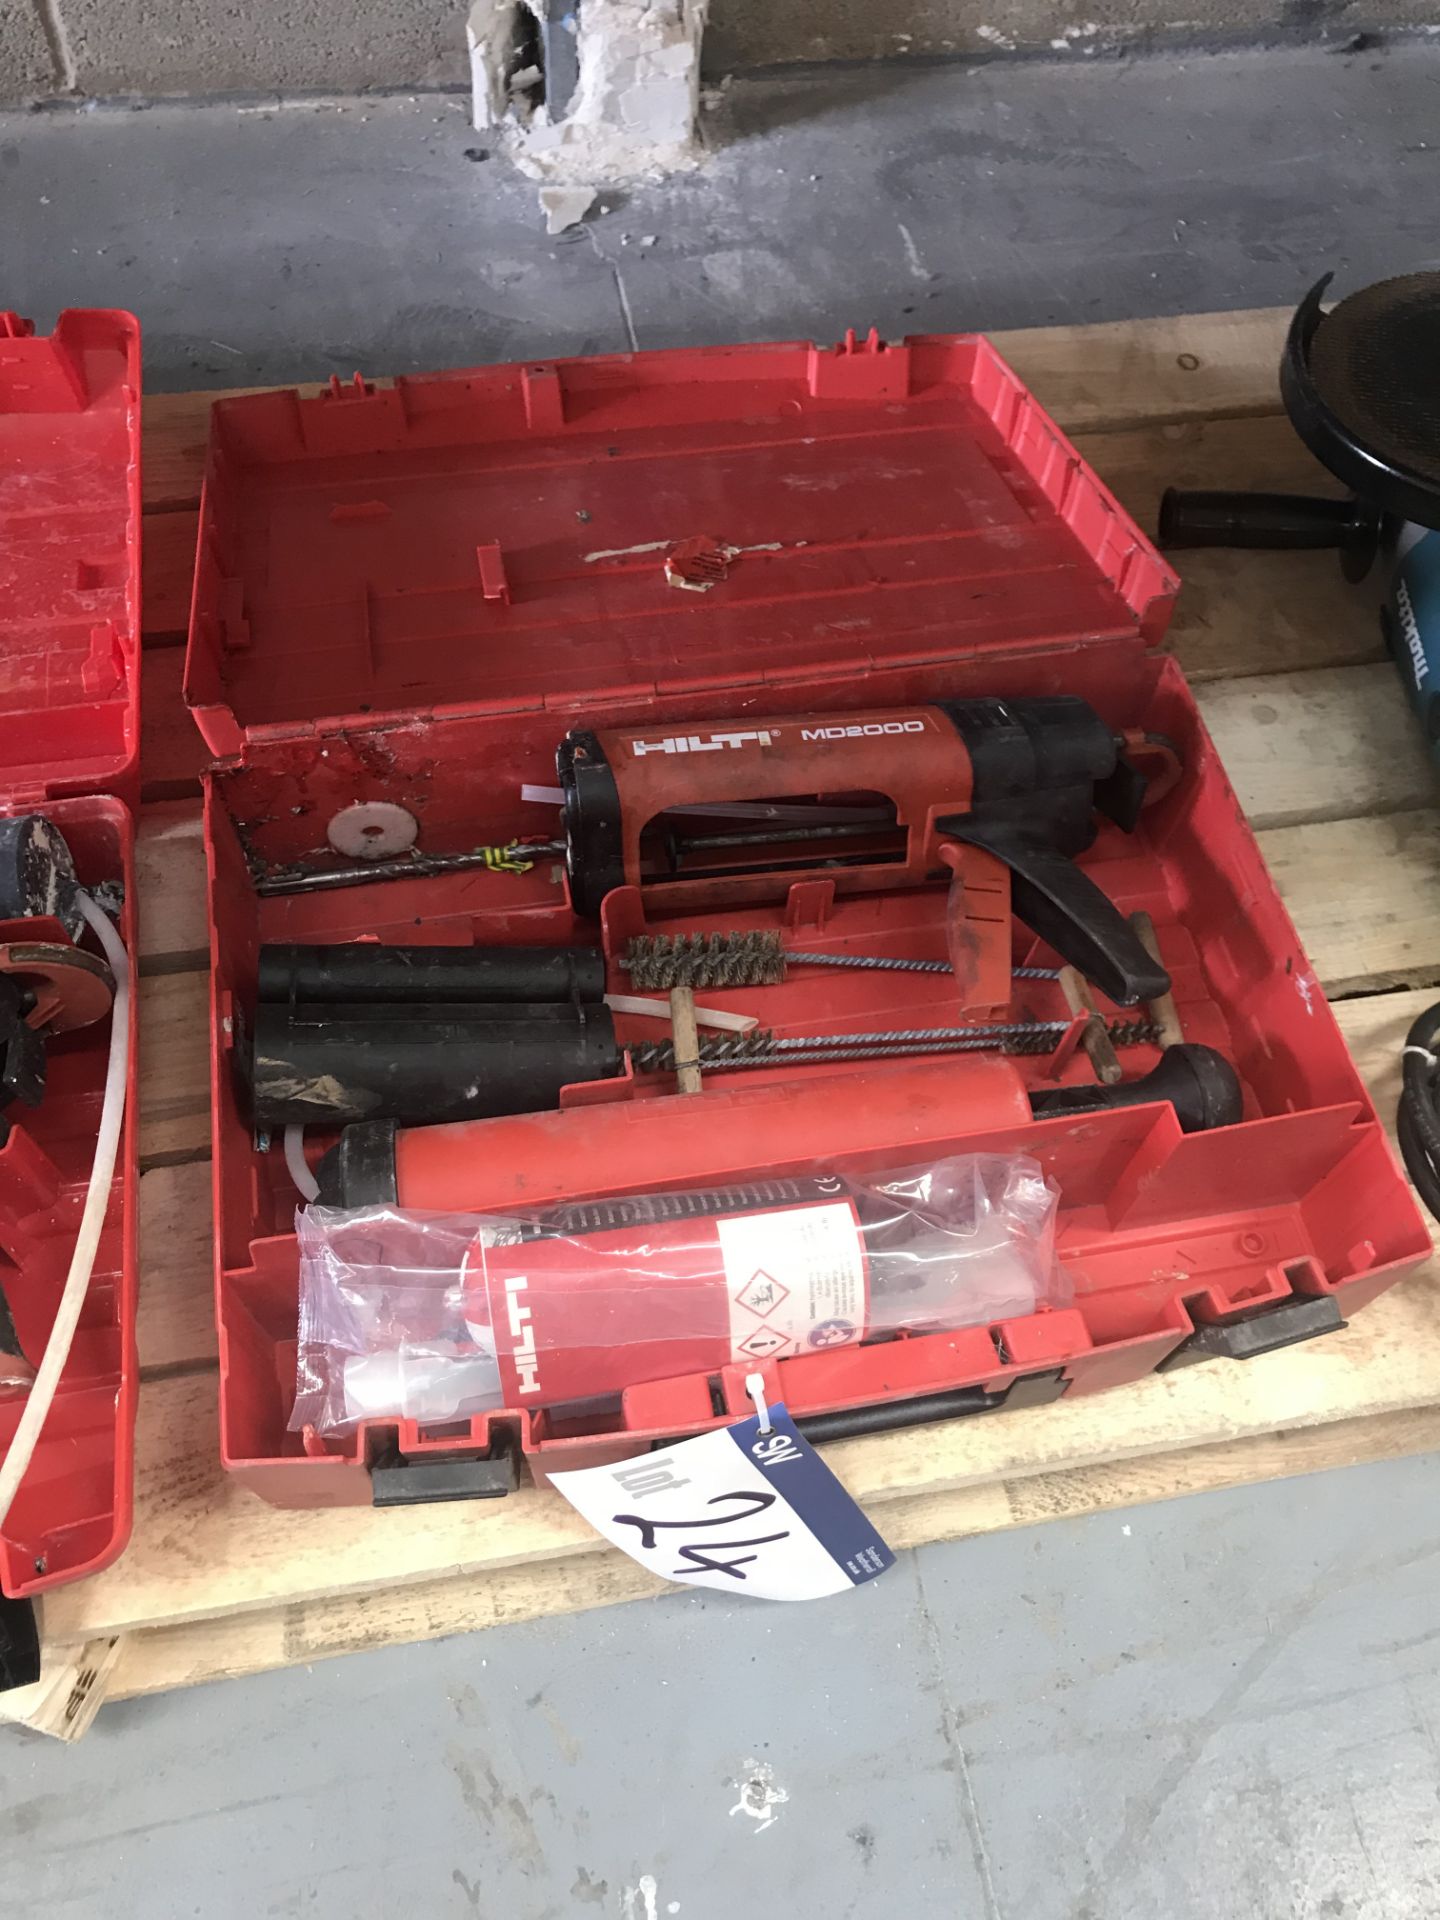 Hilti ND2000 Adhesive Anchoring Gun, c/w hole blower, rods and case